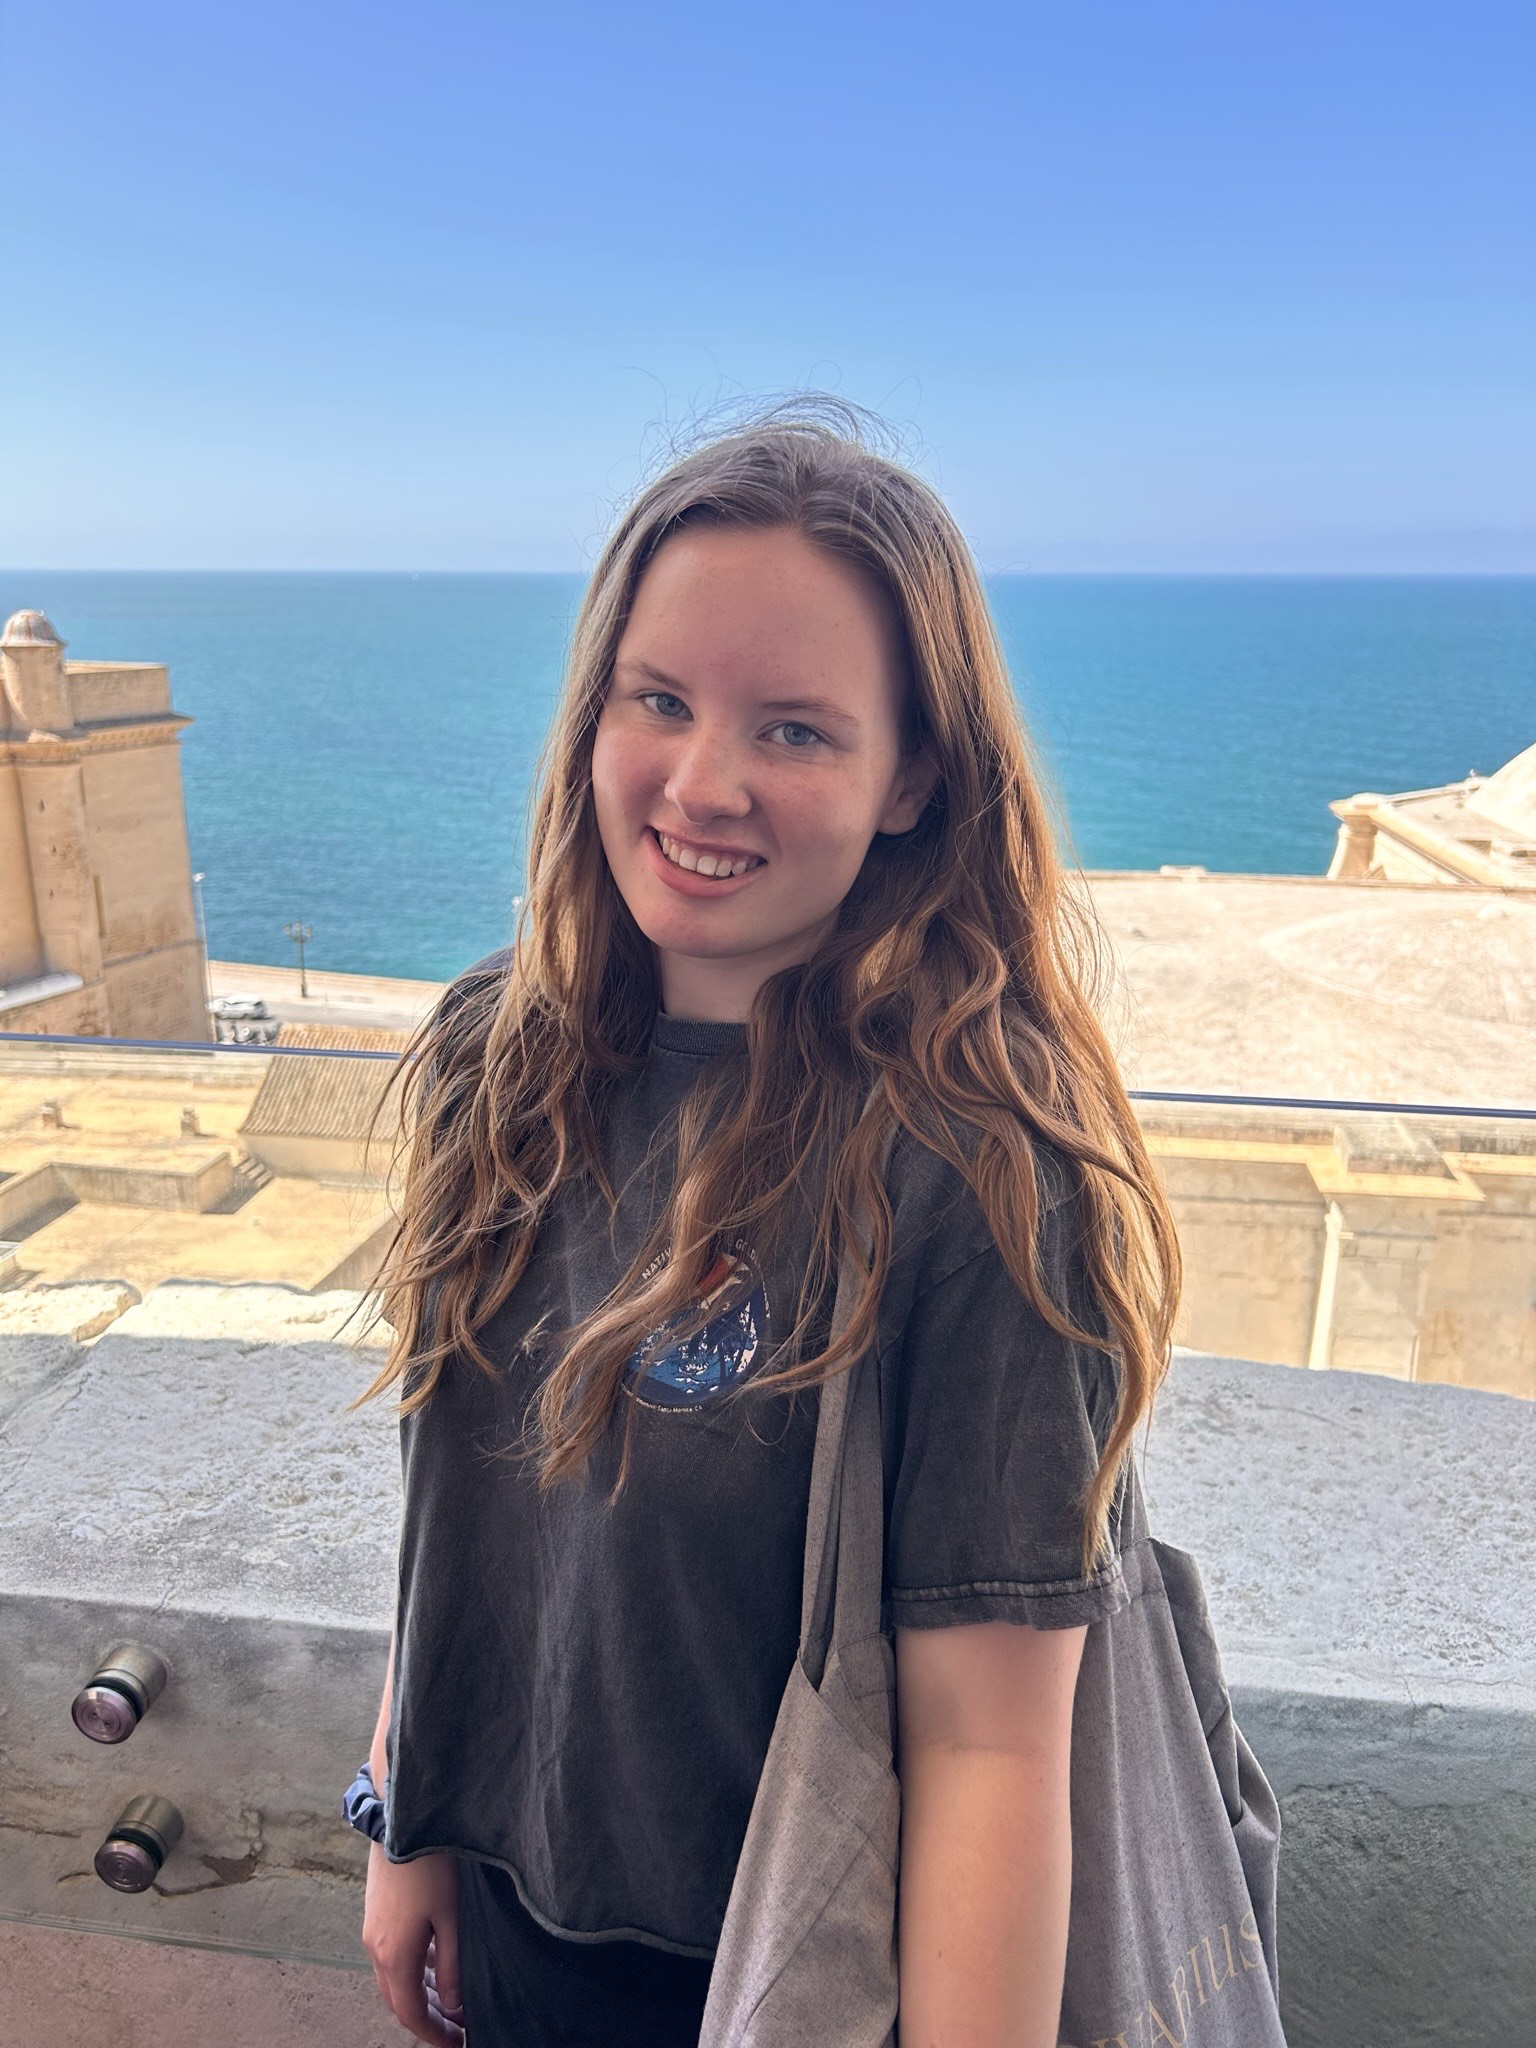 Photo of young caucasian woman (Xandra) standing on a structure in front of the ocean. She has long golden brown hair and blue eyes. She is wearing a dark grey t-shirt and has a grey tote bag on her shoulder.